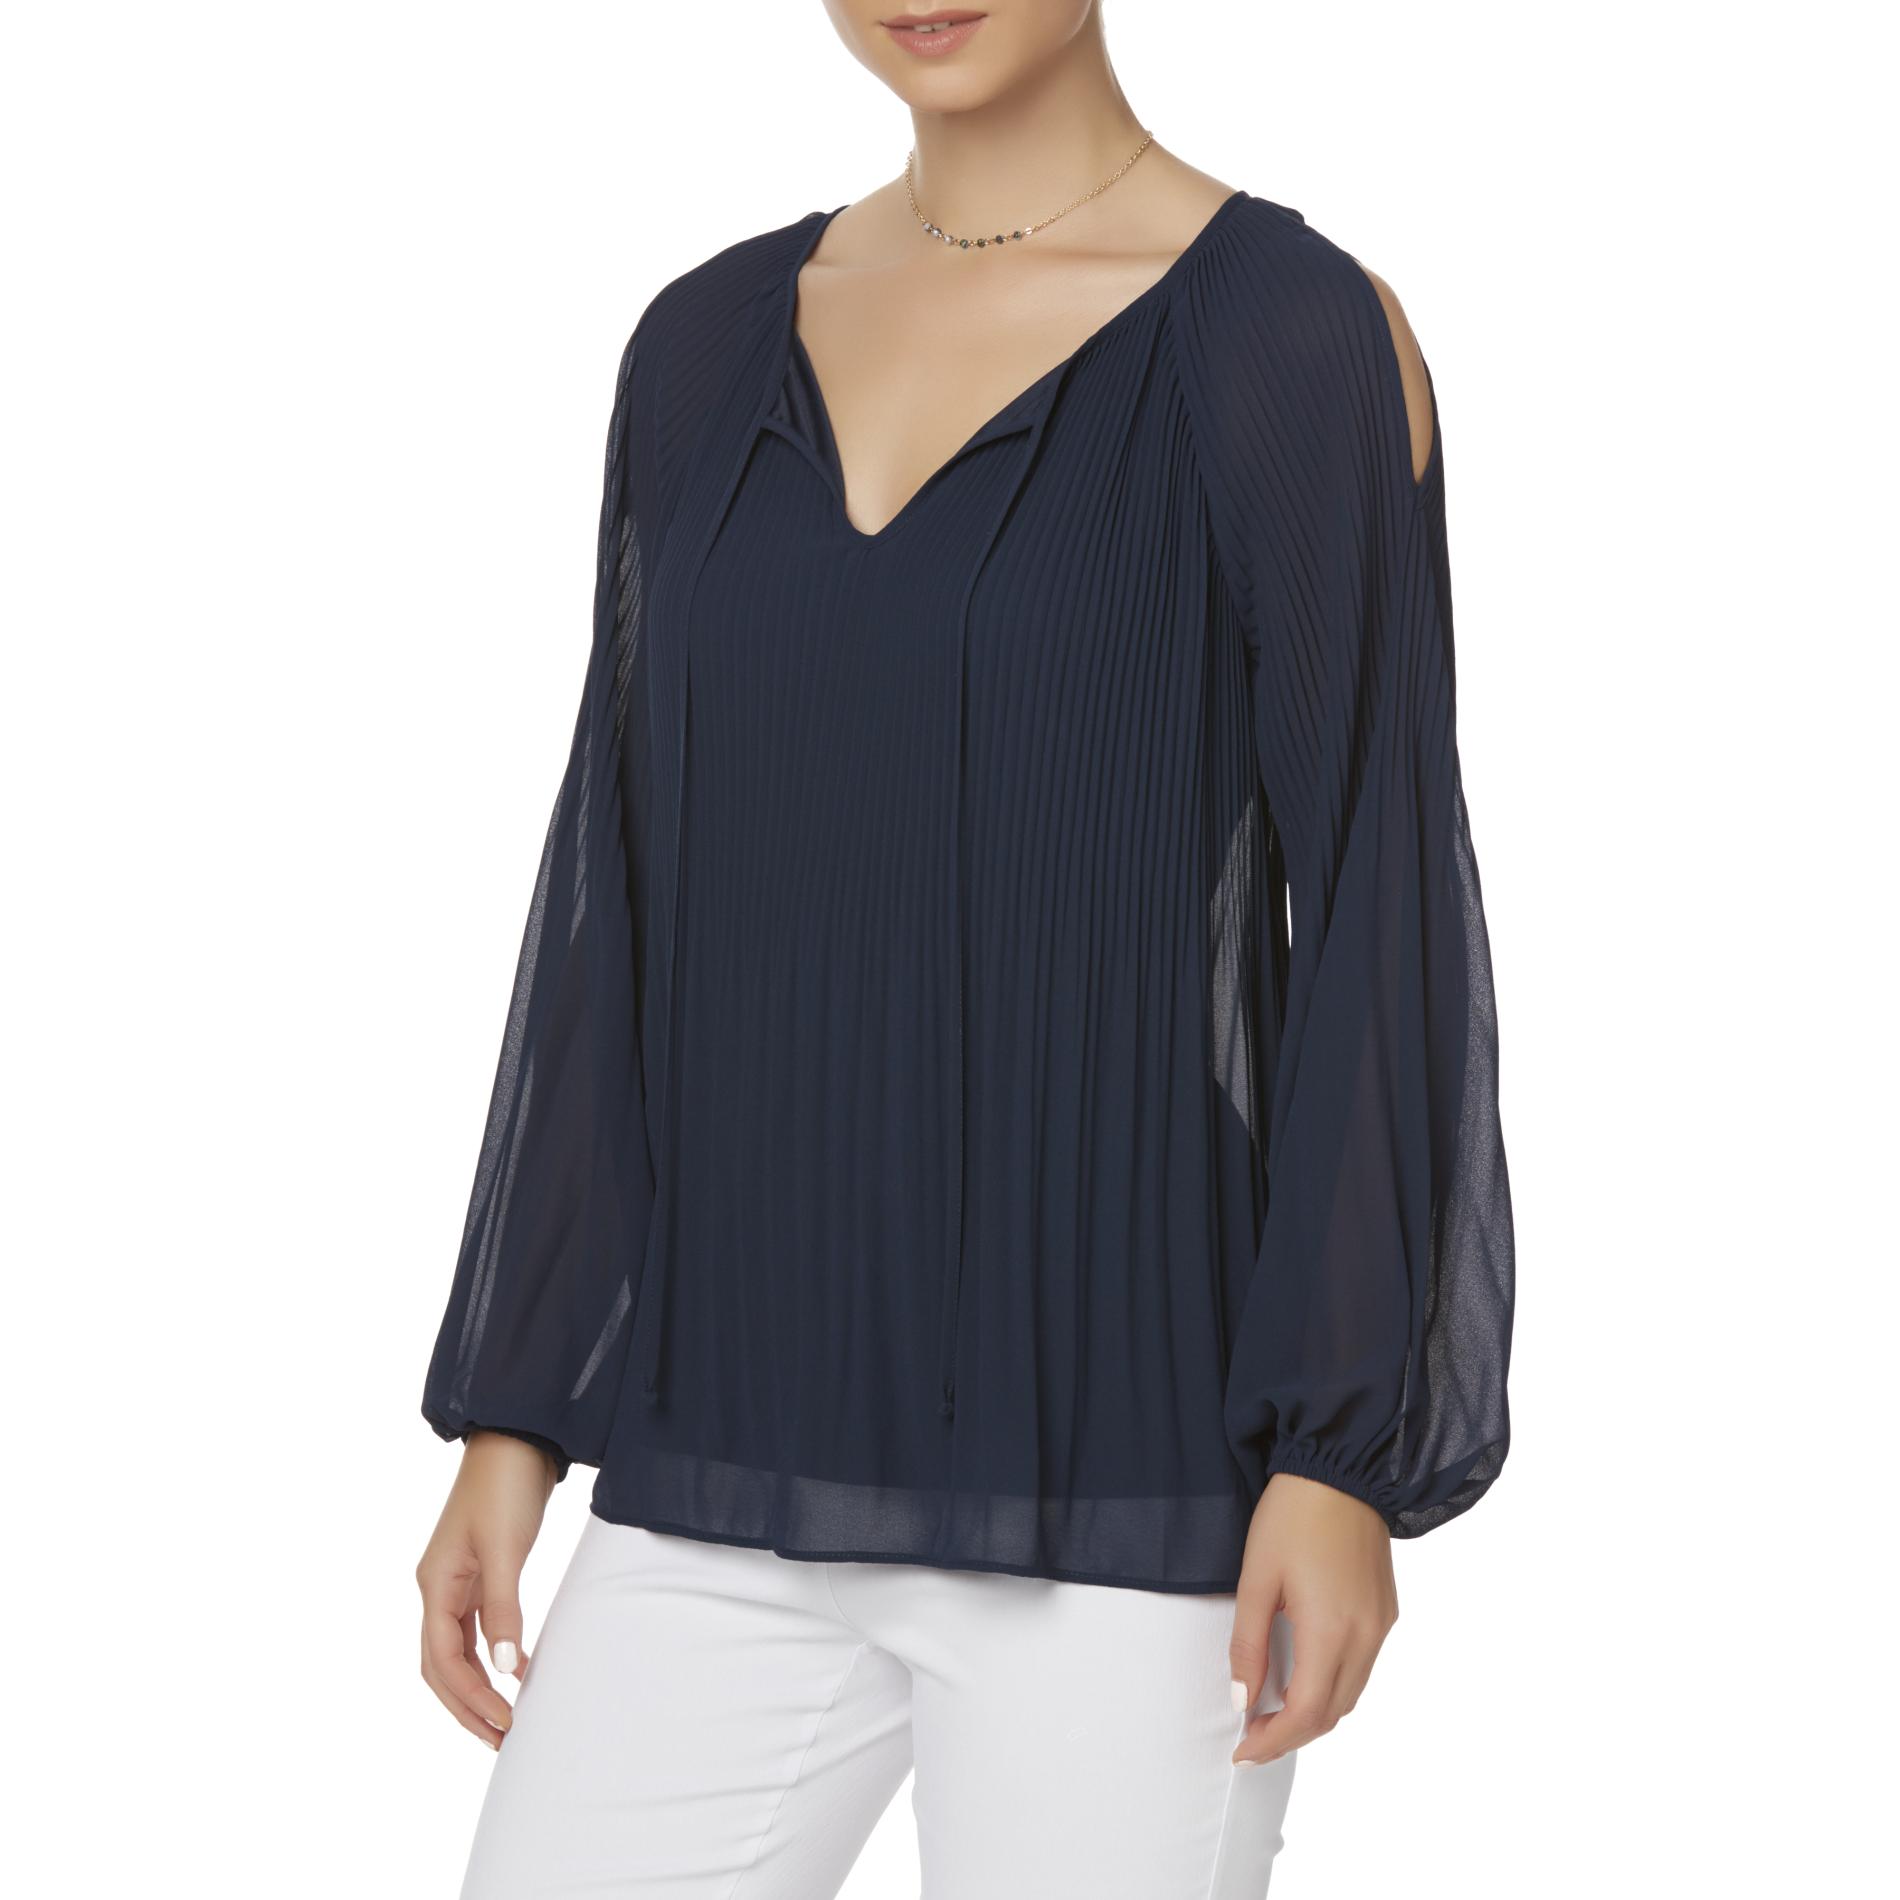 Simply Styled Women's Pleated Peasant Top